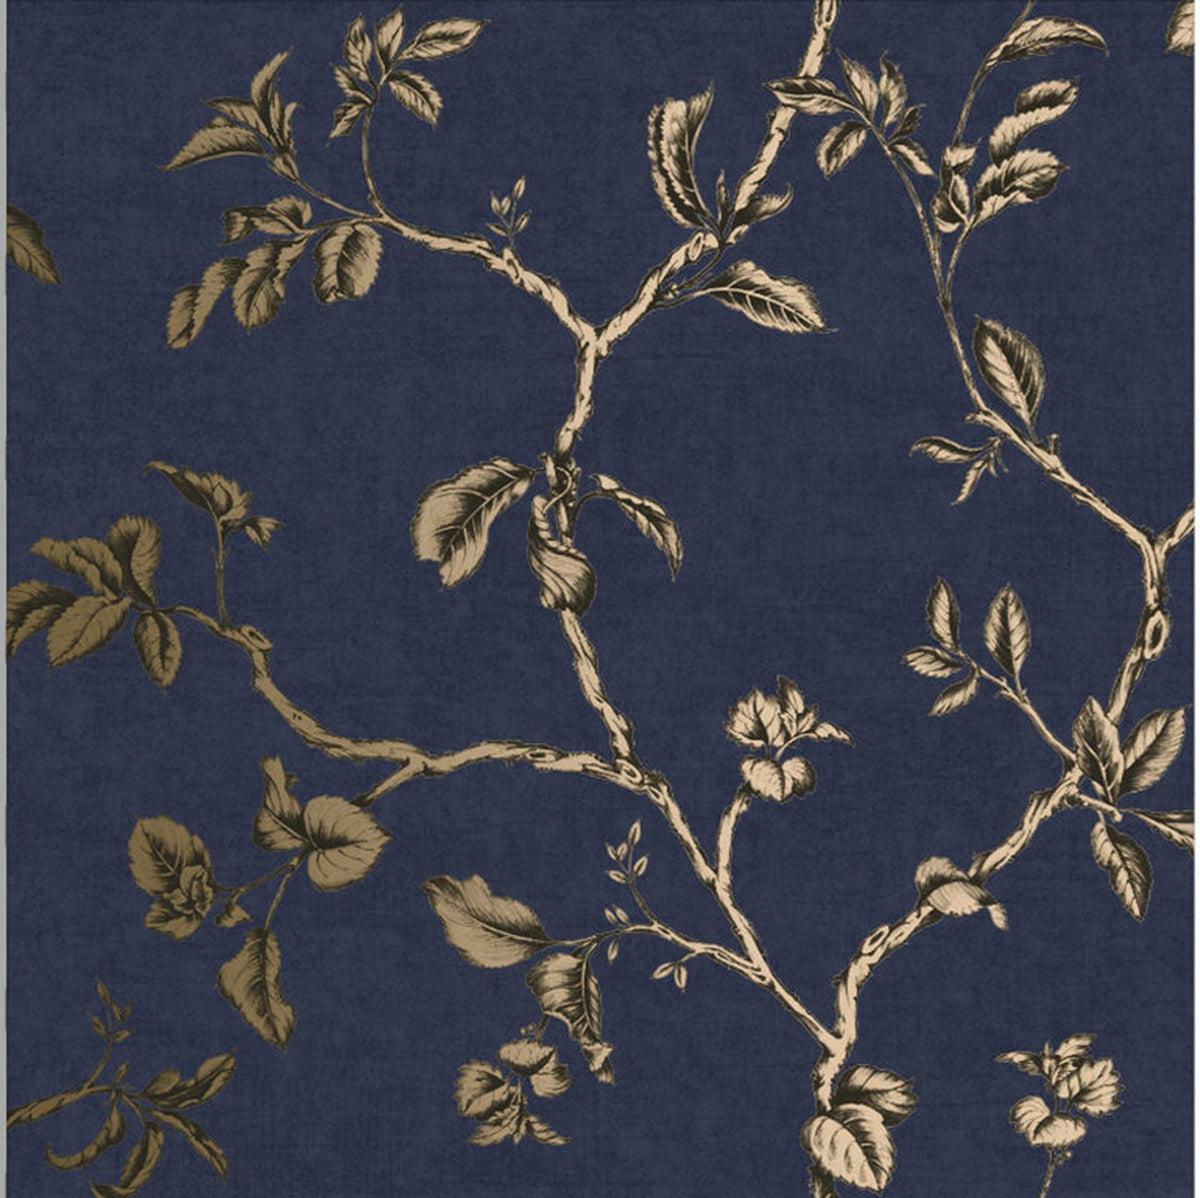 Graham & Brown Botanica Midnight Removable Wallpaper 105454 - The